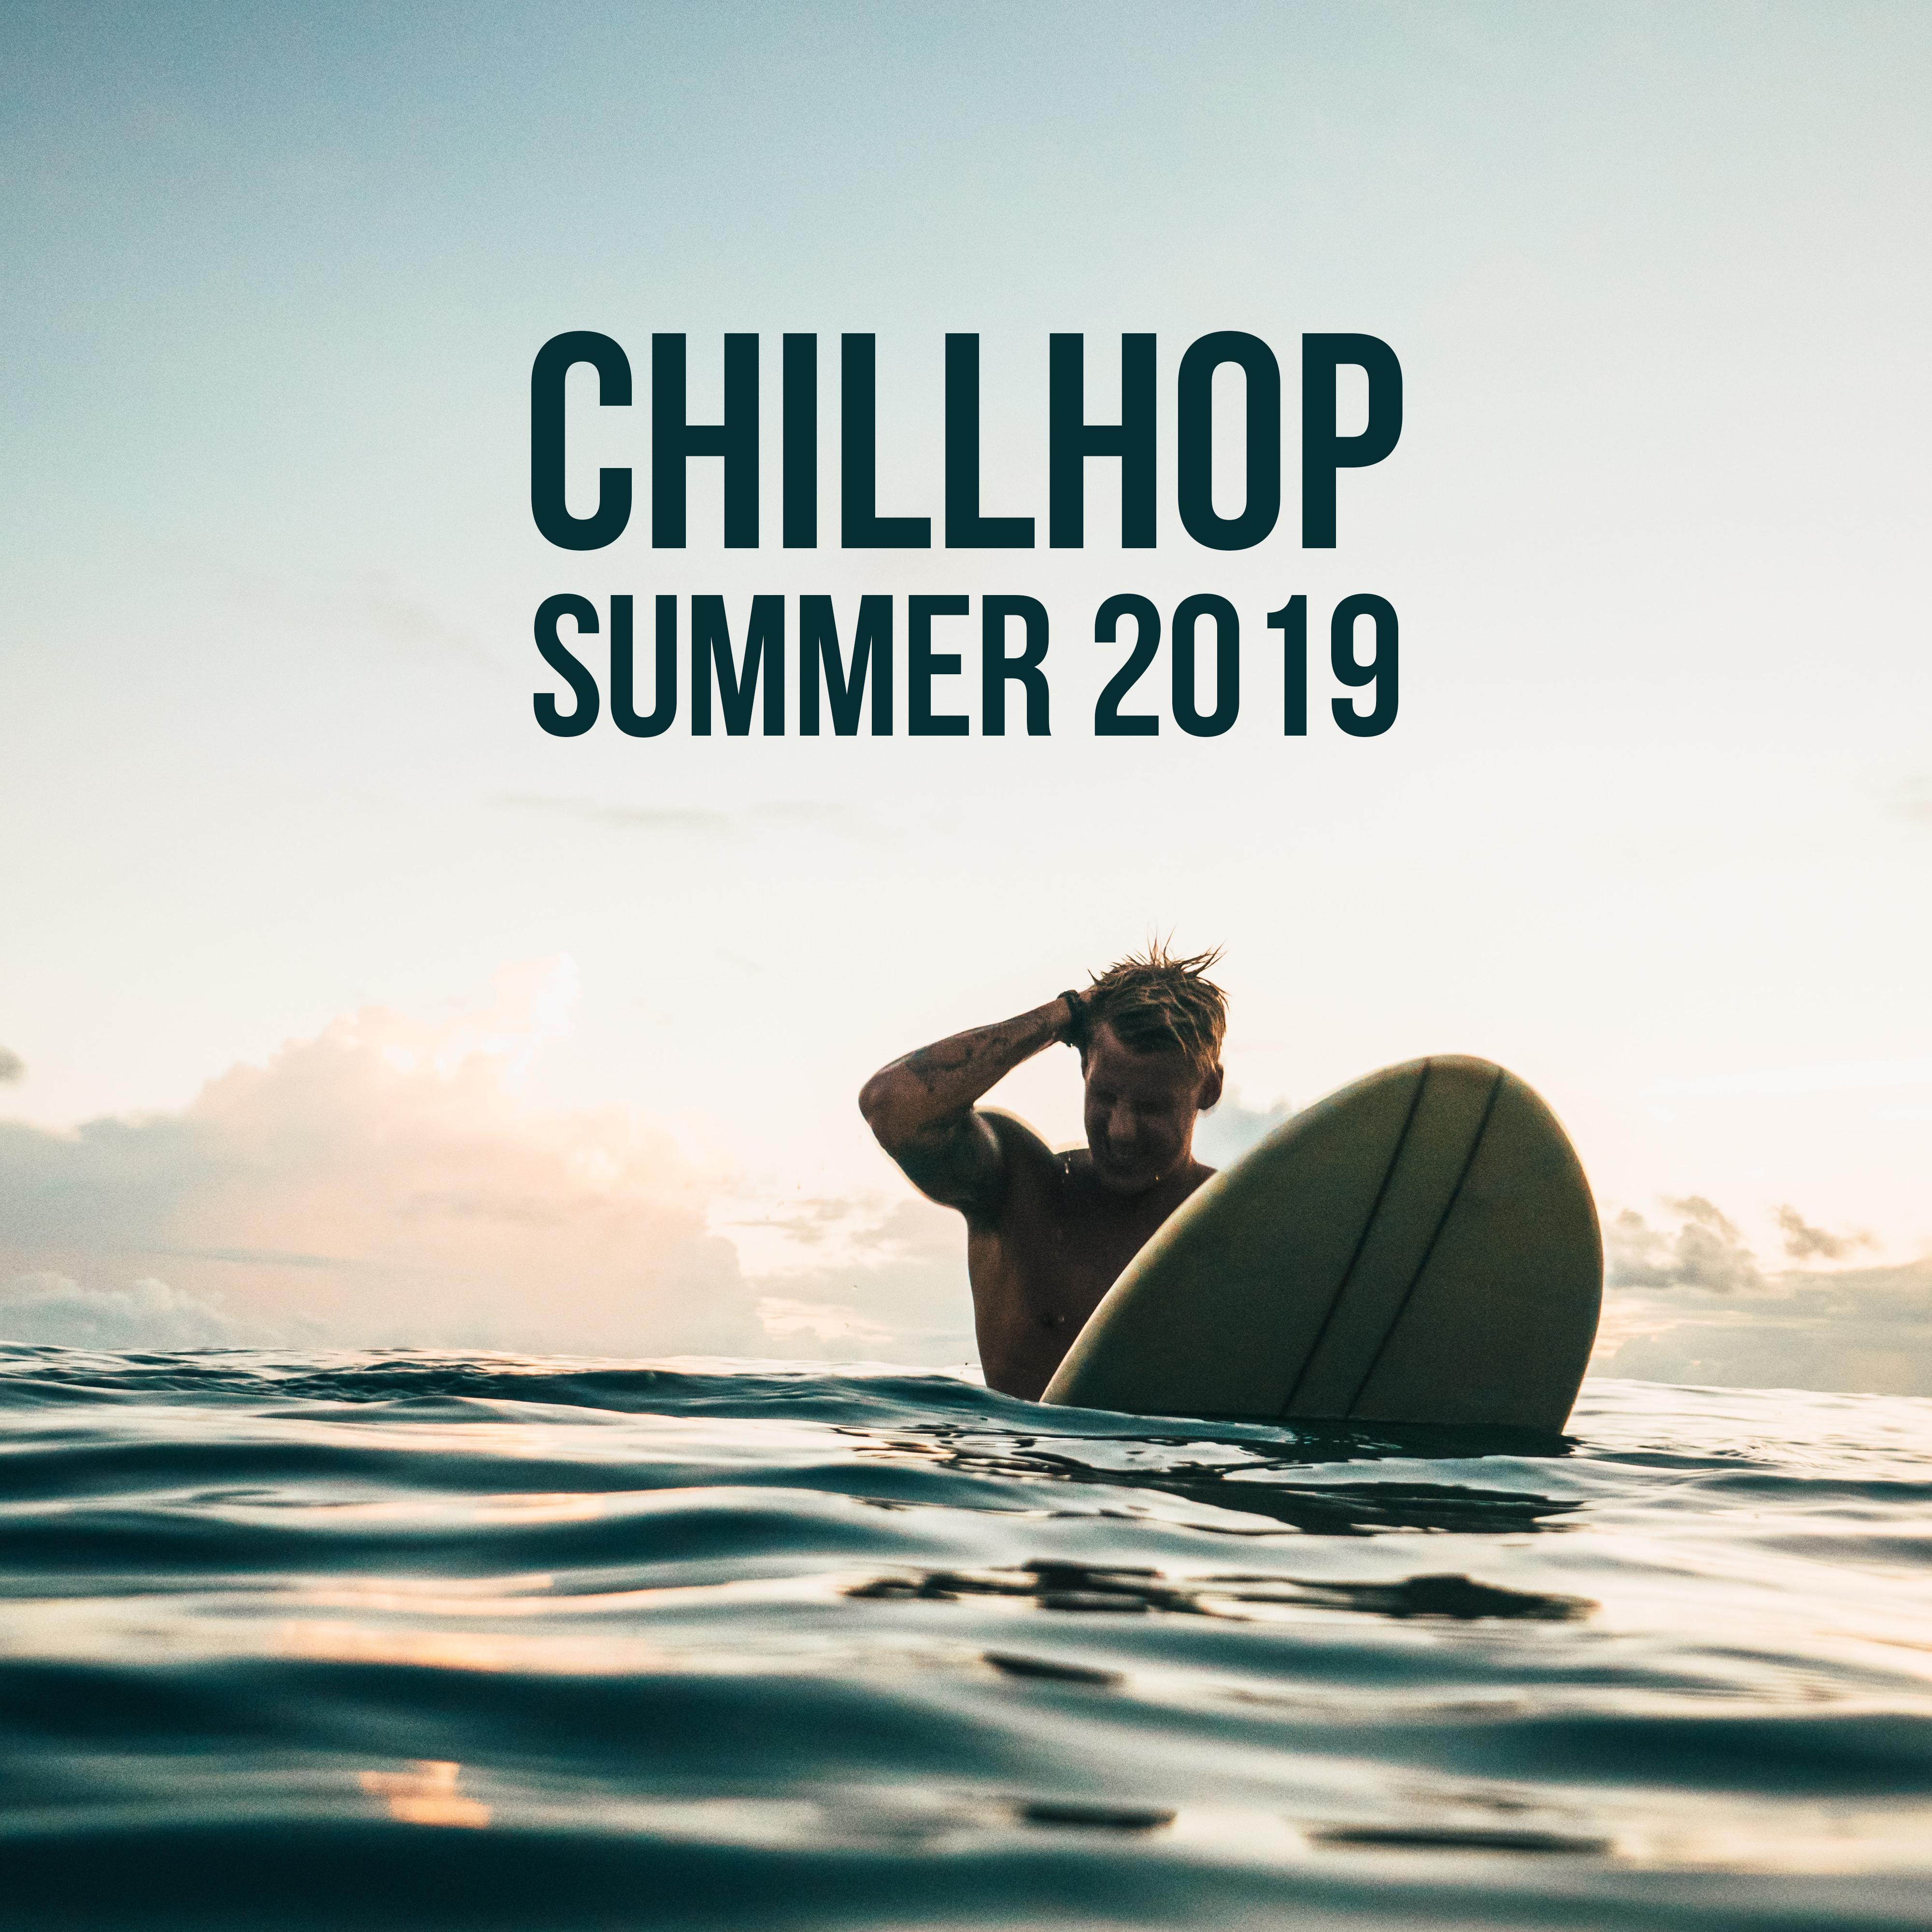 Chillhop Summer 2019  Ibiza Chill Out, Beach Party, Summer Relax, Ibiza Lounge, Total Chill, Beach Melodies